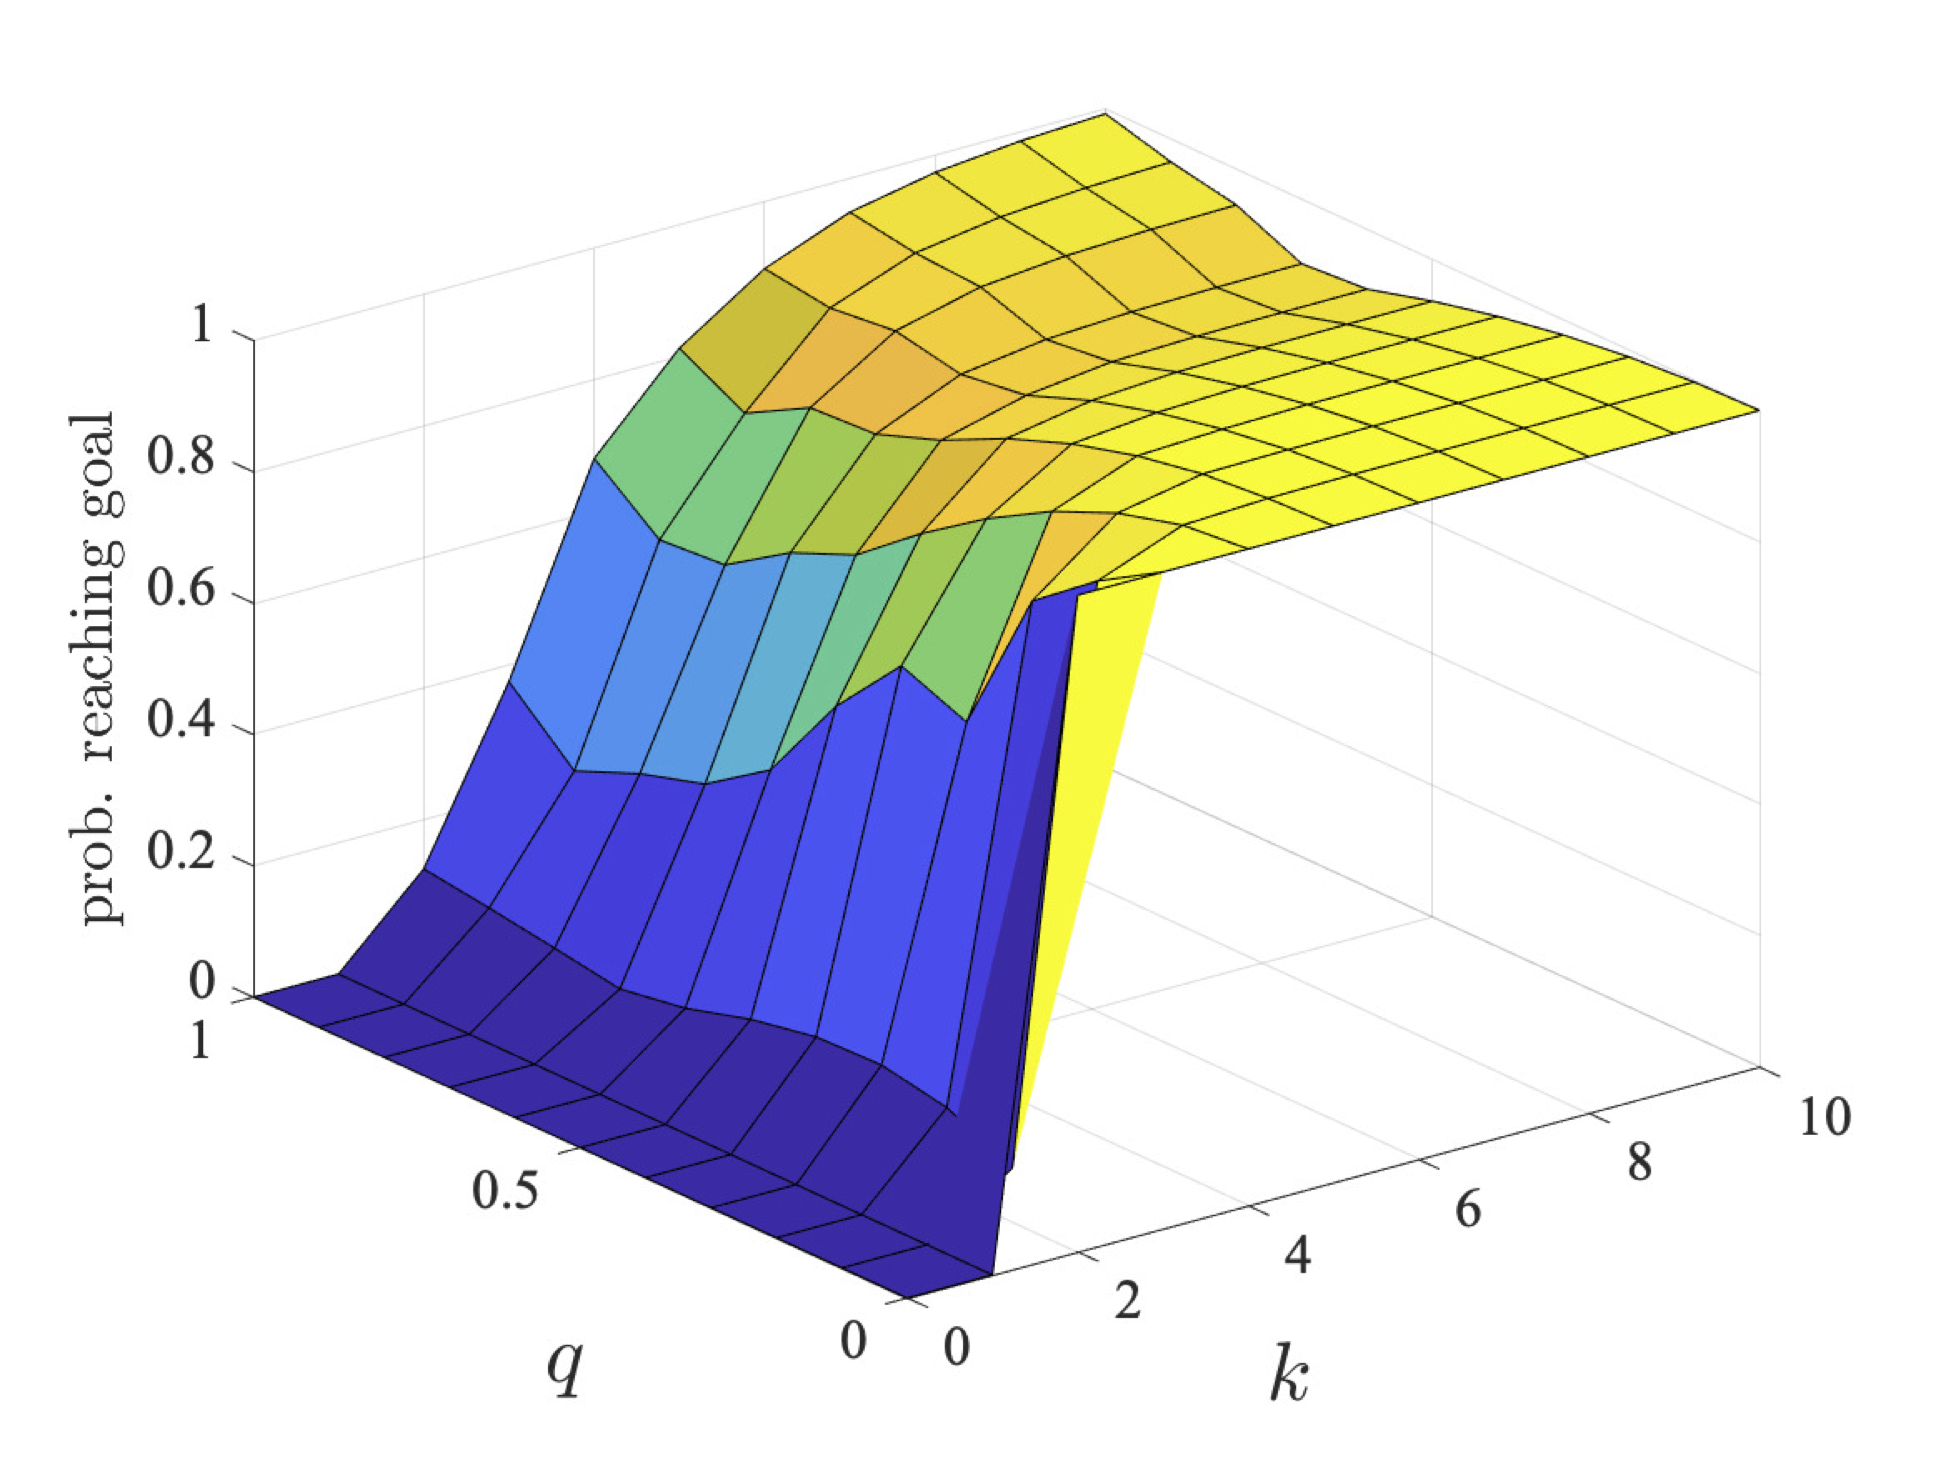 plot: maximum probability robot 1 can ensure they reach their goal within a deadline (l=3)